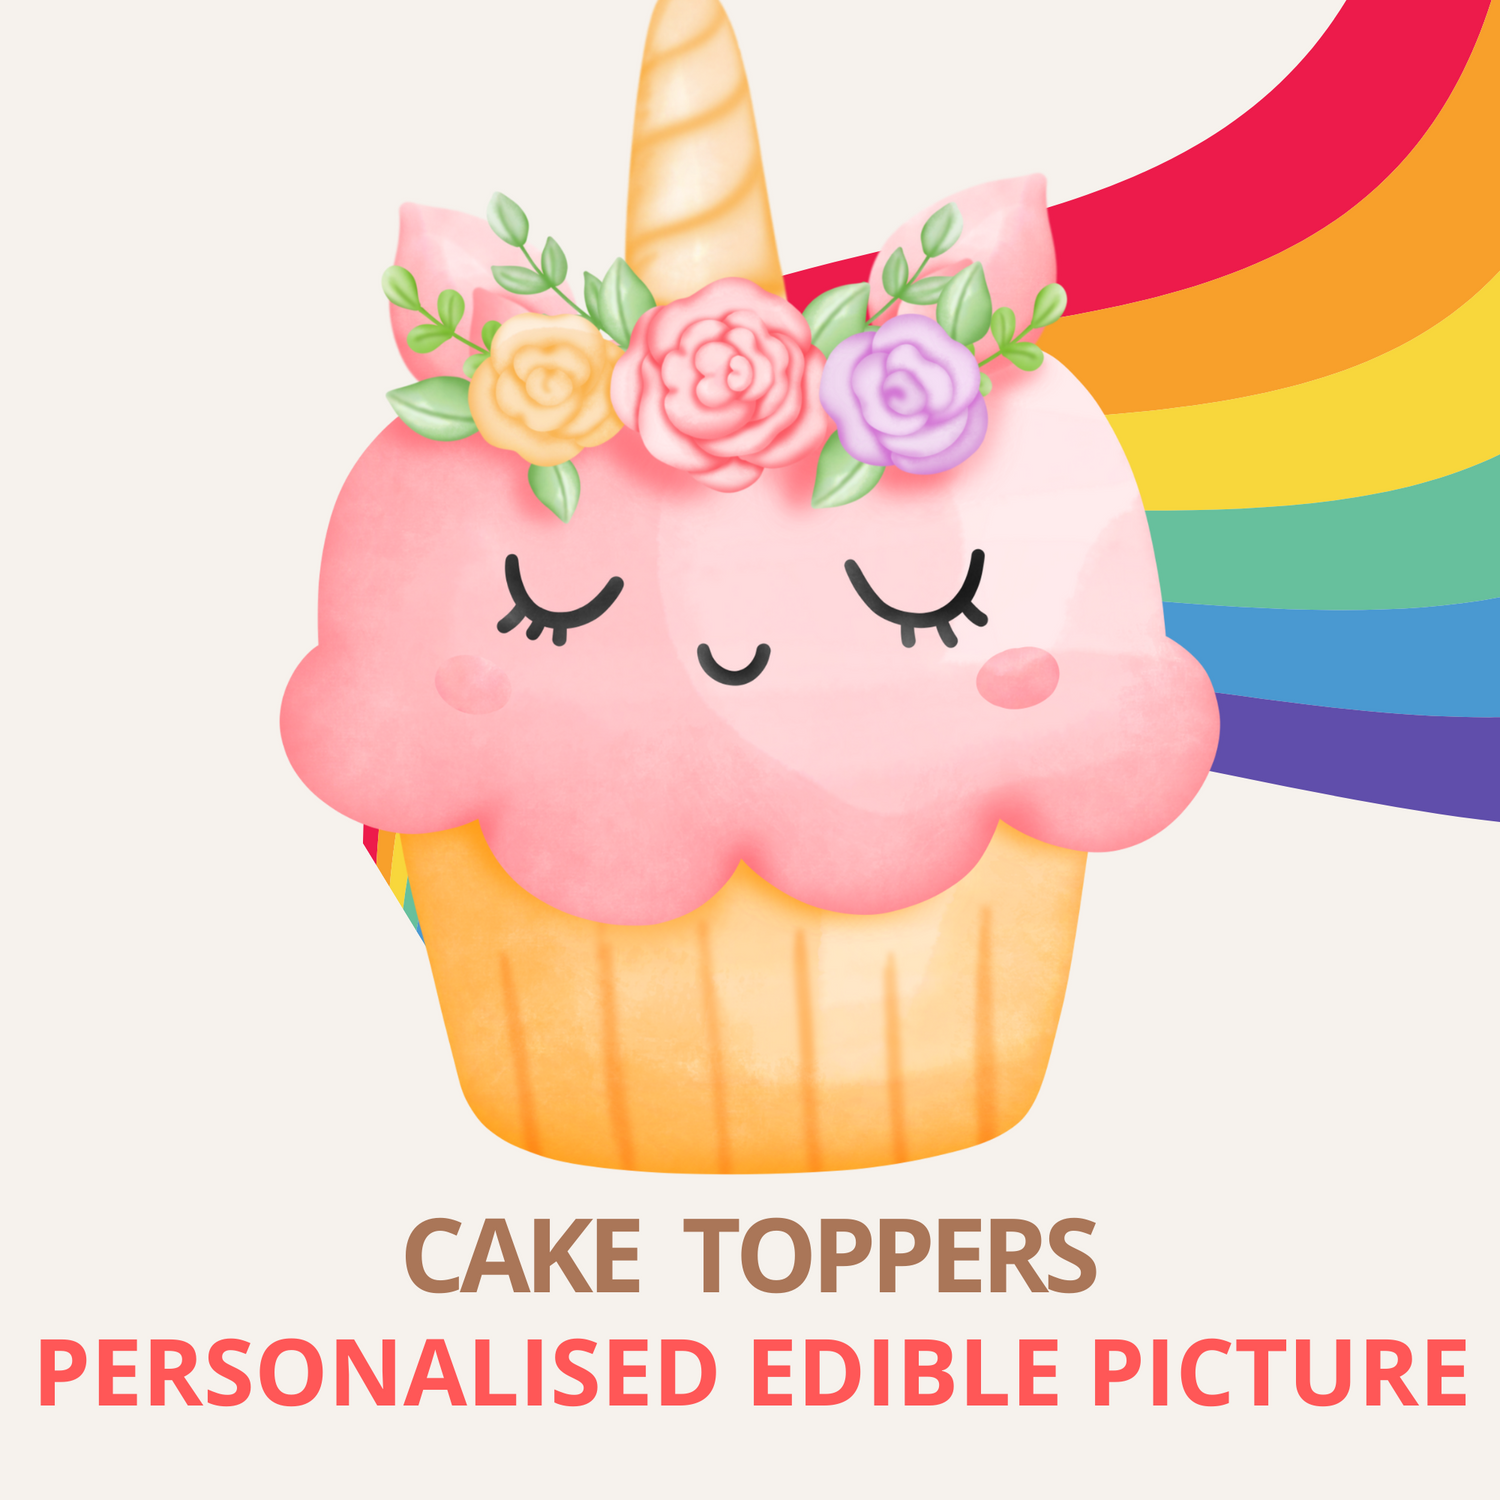 Printed Edible Cake Toppers